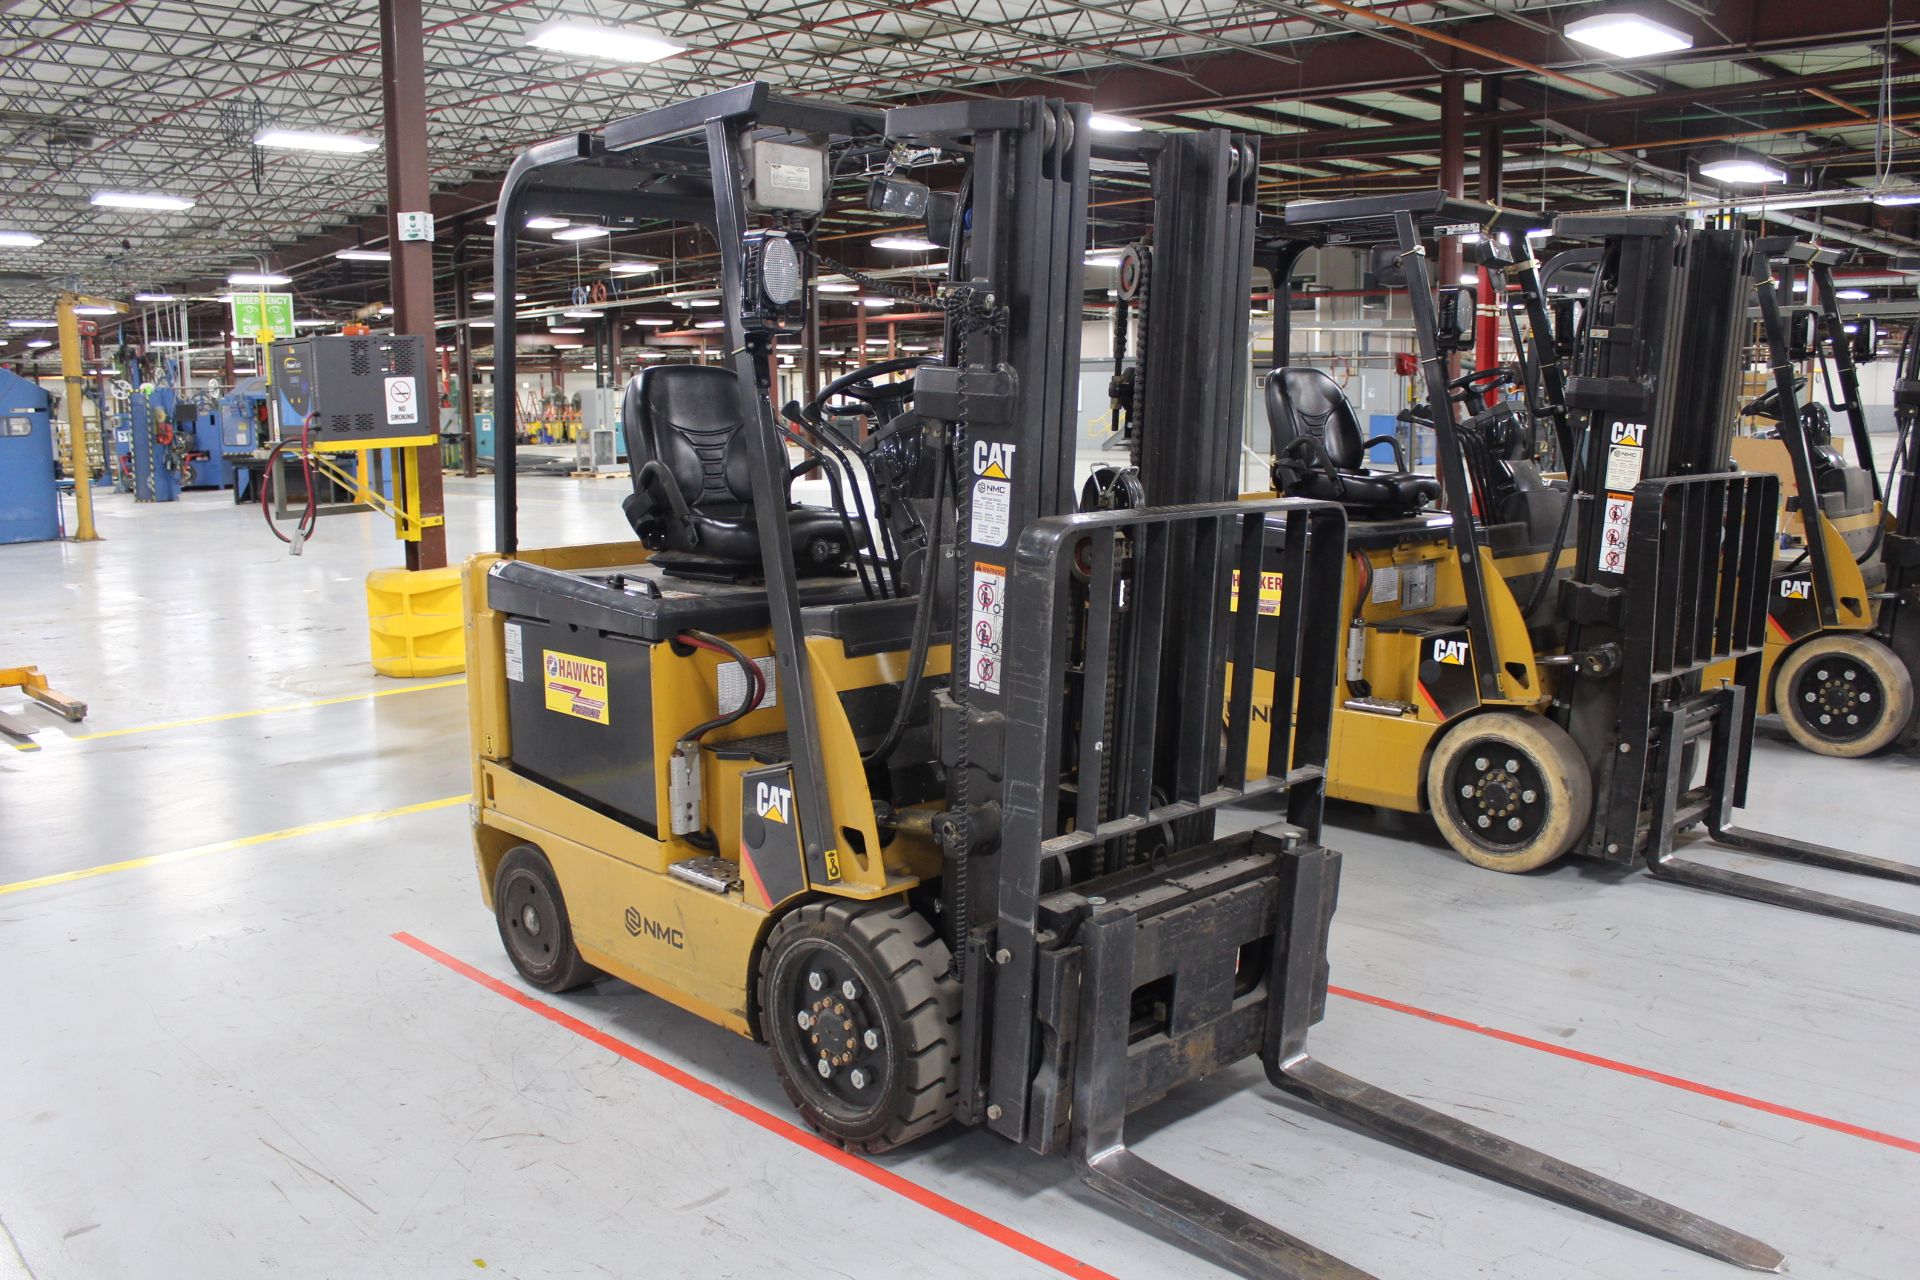 Caterpillar Model E5000-AC 4,450 Lb. Capacity Electric Forklift, S/N A4EC240780, Sit-Down Rider, - Image 2 of 4